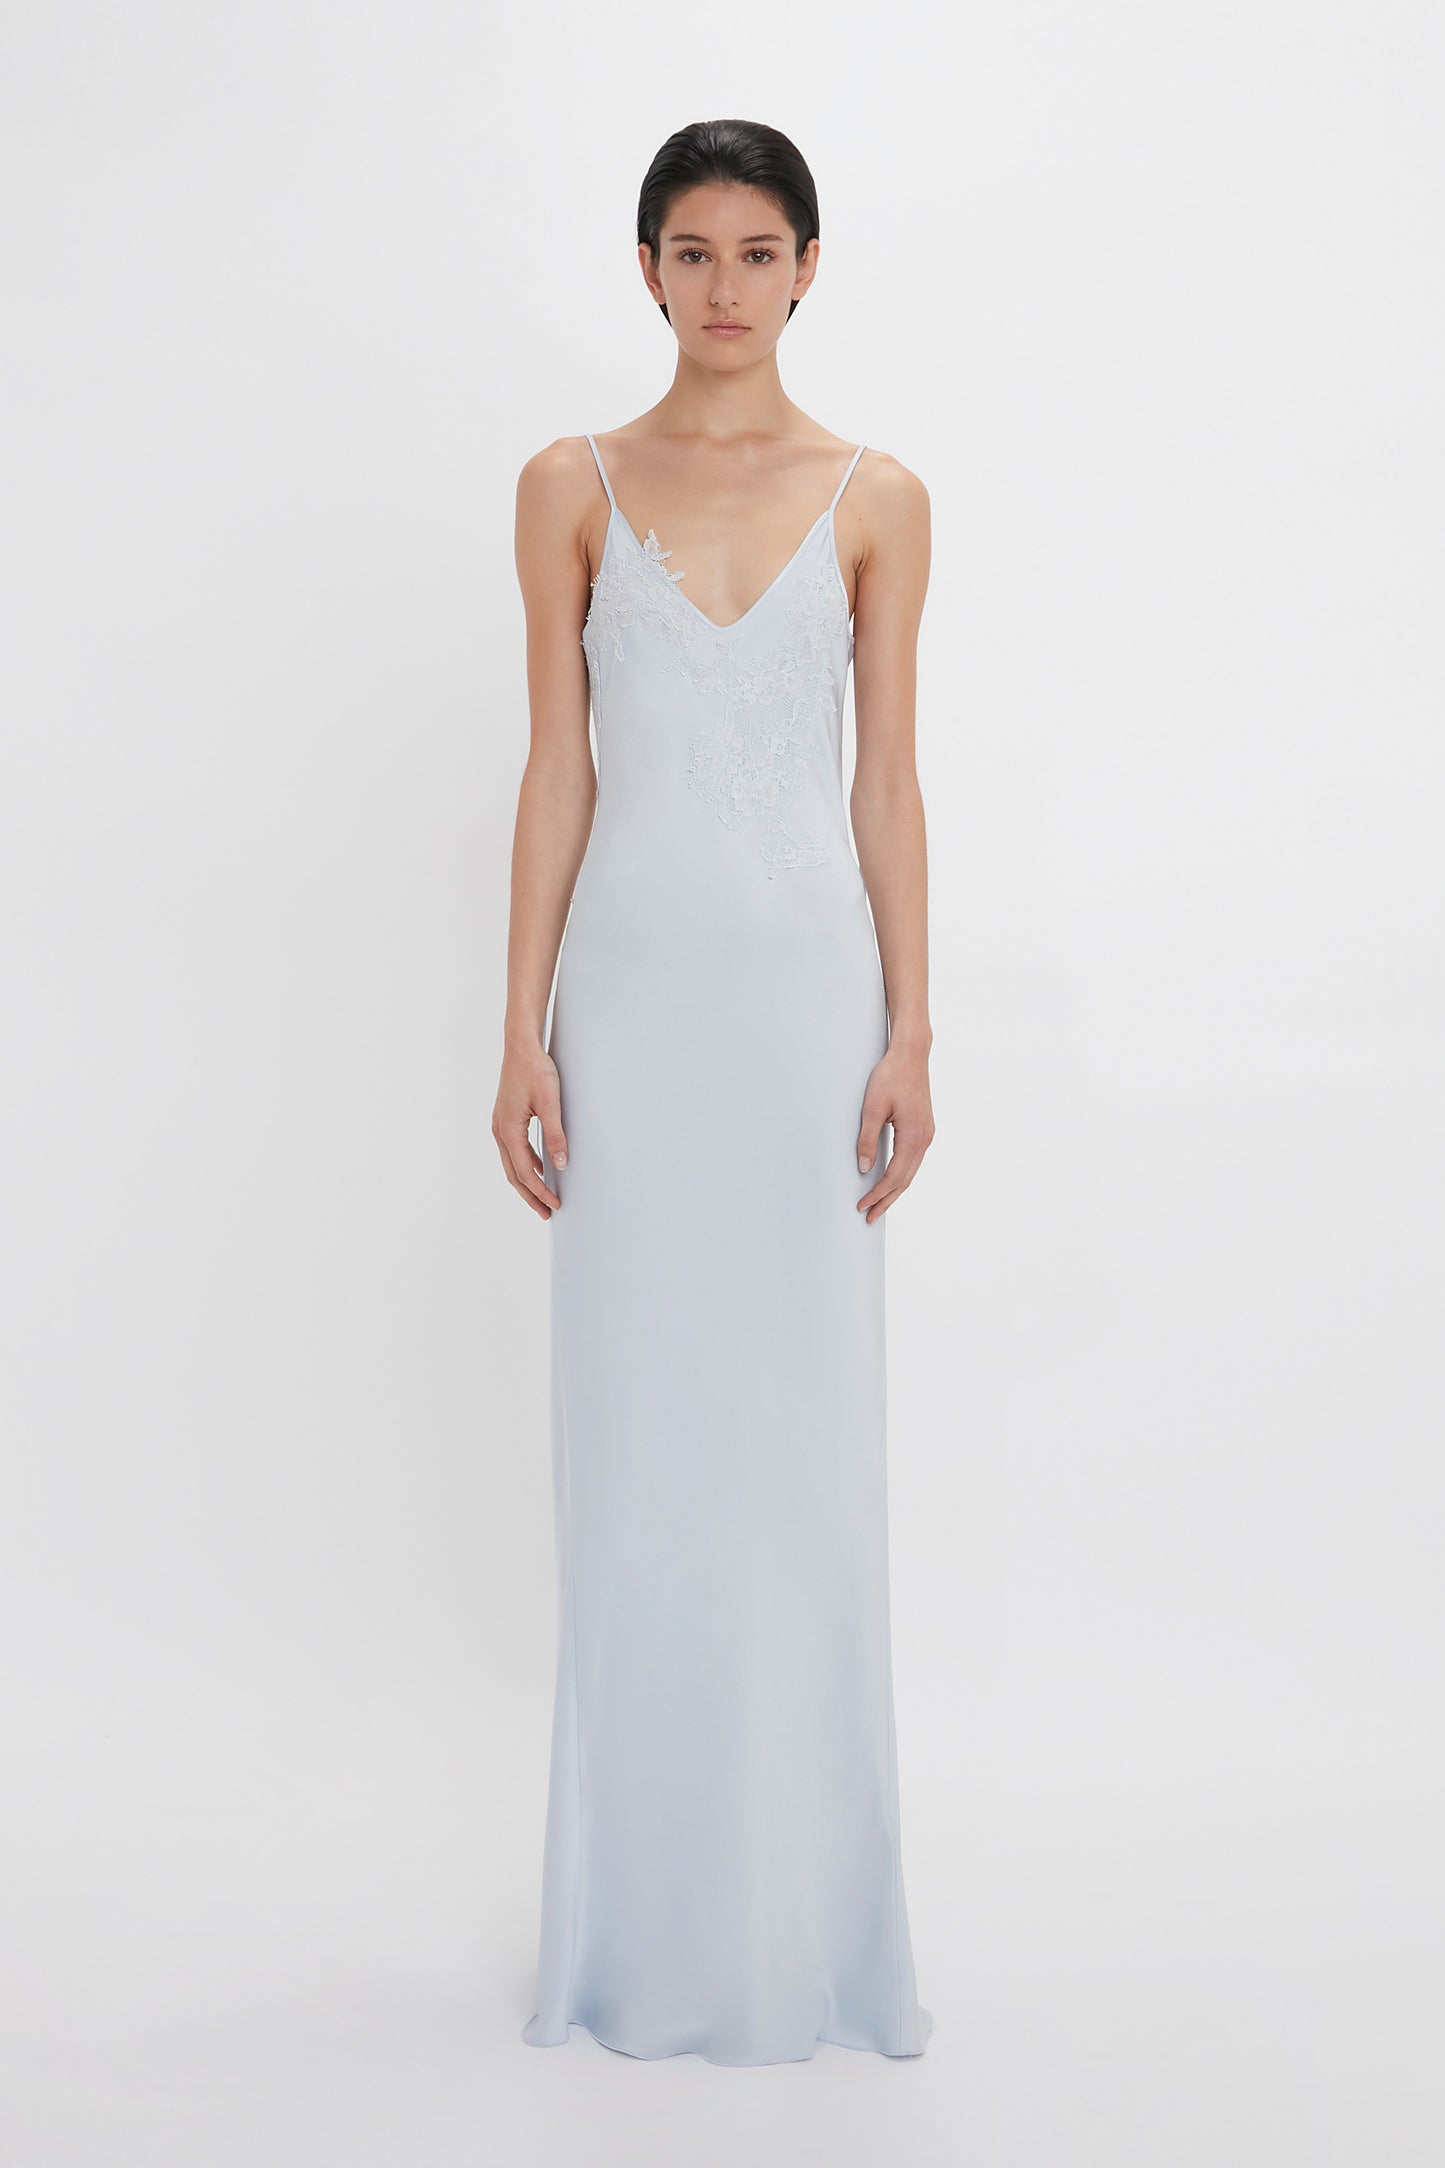 A woman wearing a Victoria Beckham Exclusive Lace Detail Floor-Length Cami Dress In Ice, standing against a white background.